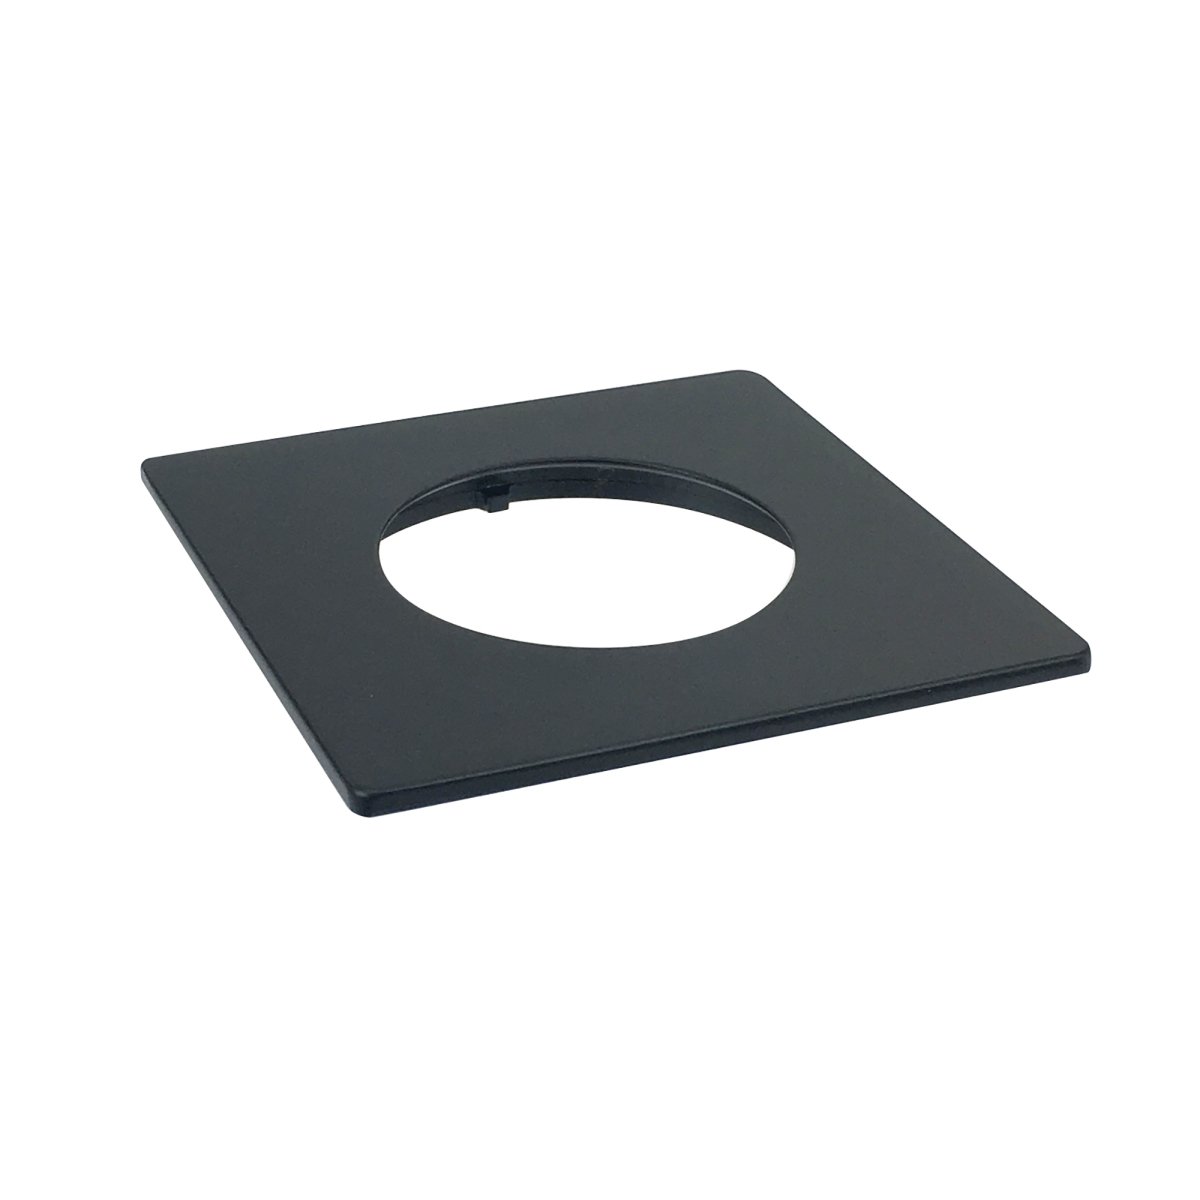 Picture of Nora Lighting NM2-2SETB 2 in. M2 Square Trim Ring for NM2-2R270 Round Elbow Downlight, Black